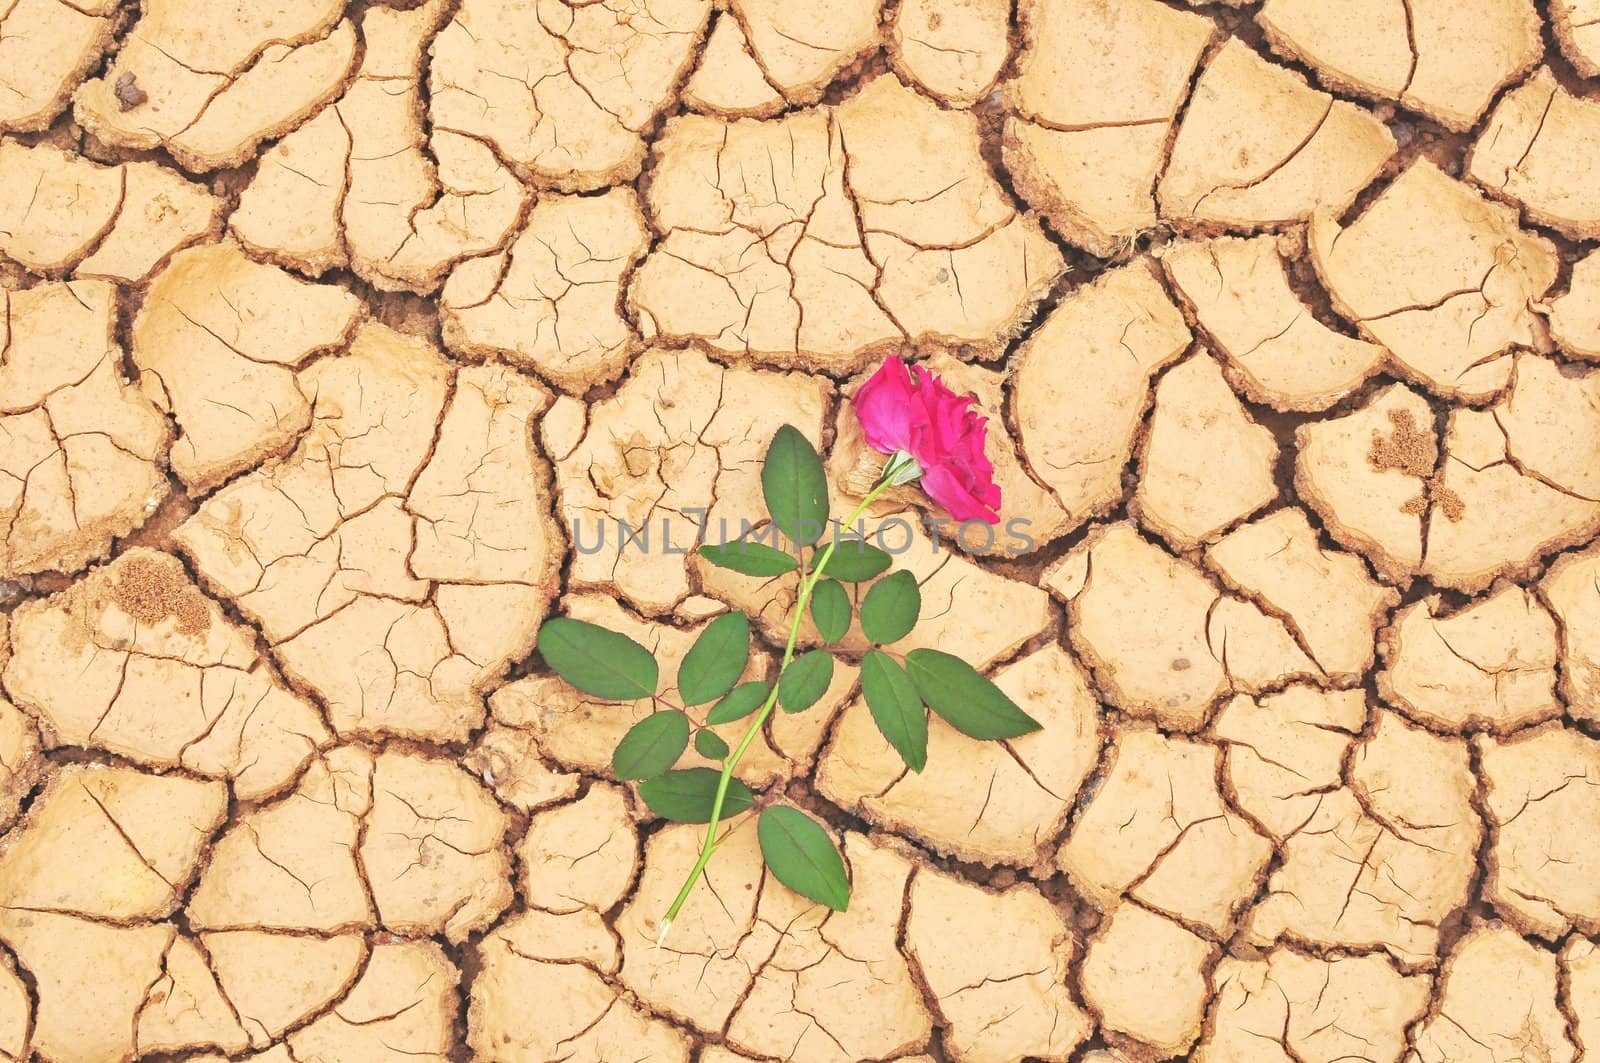 Red rose on cracked ground 